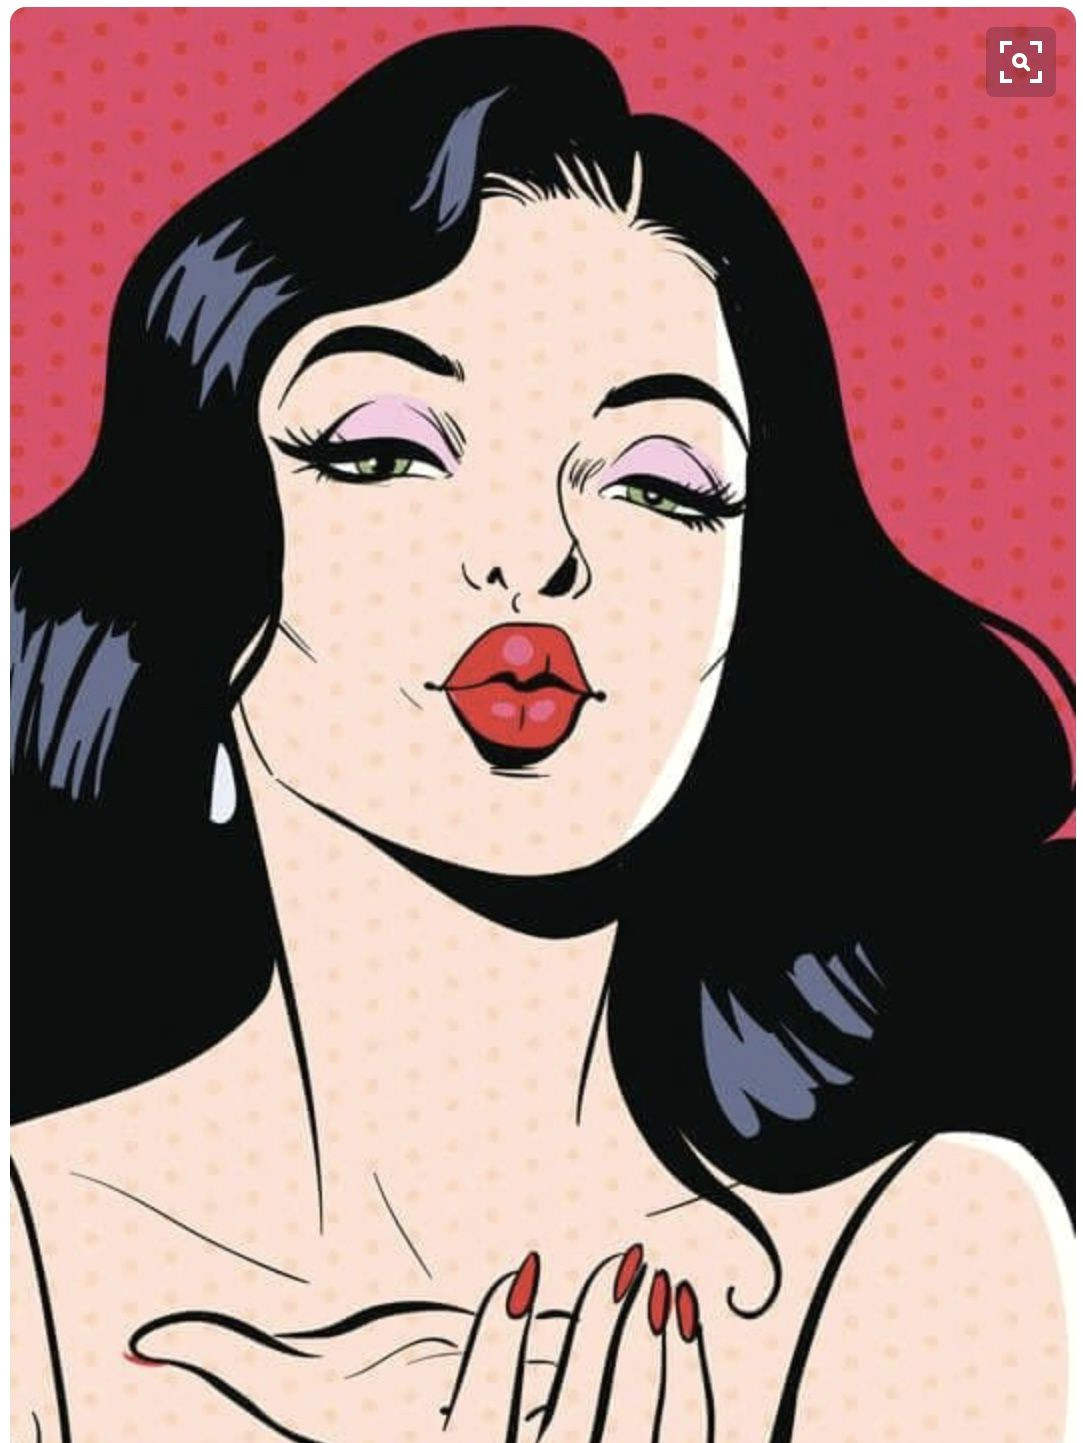 Drawing Of Girl Blowing A Kiss Blown Kiss A Julianne Mcpetersa No Pin Limits Humanity A Kiss to